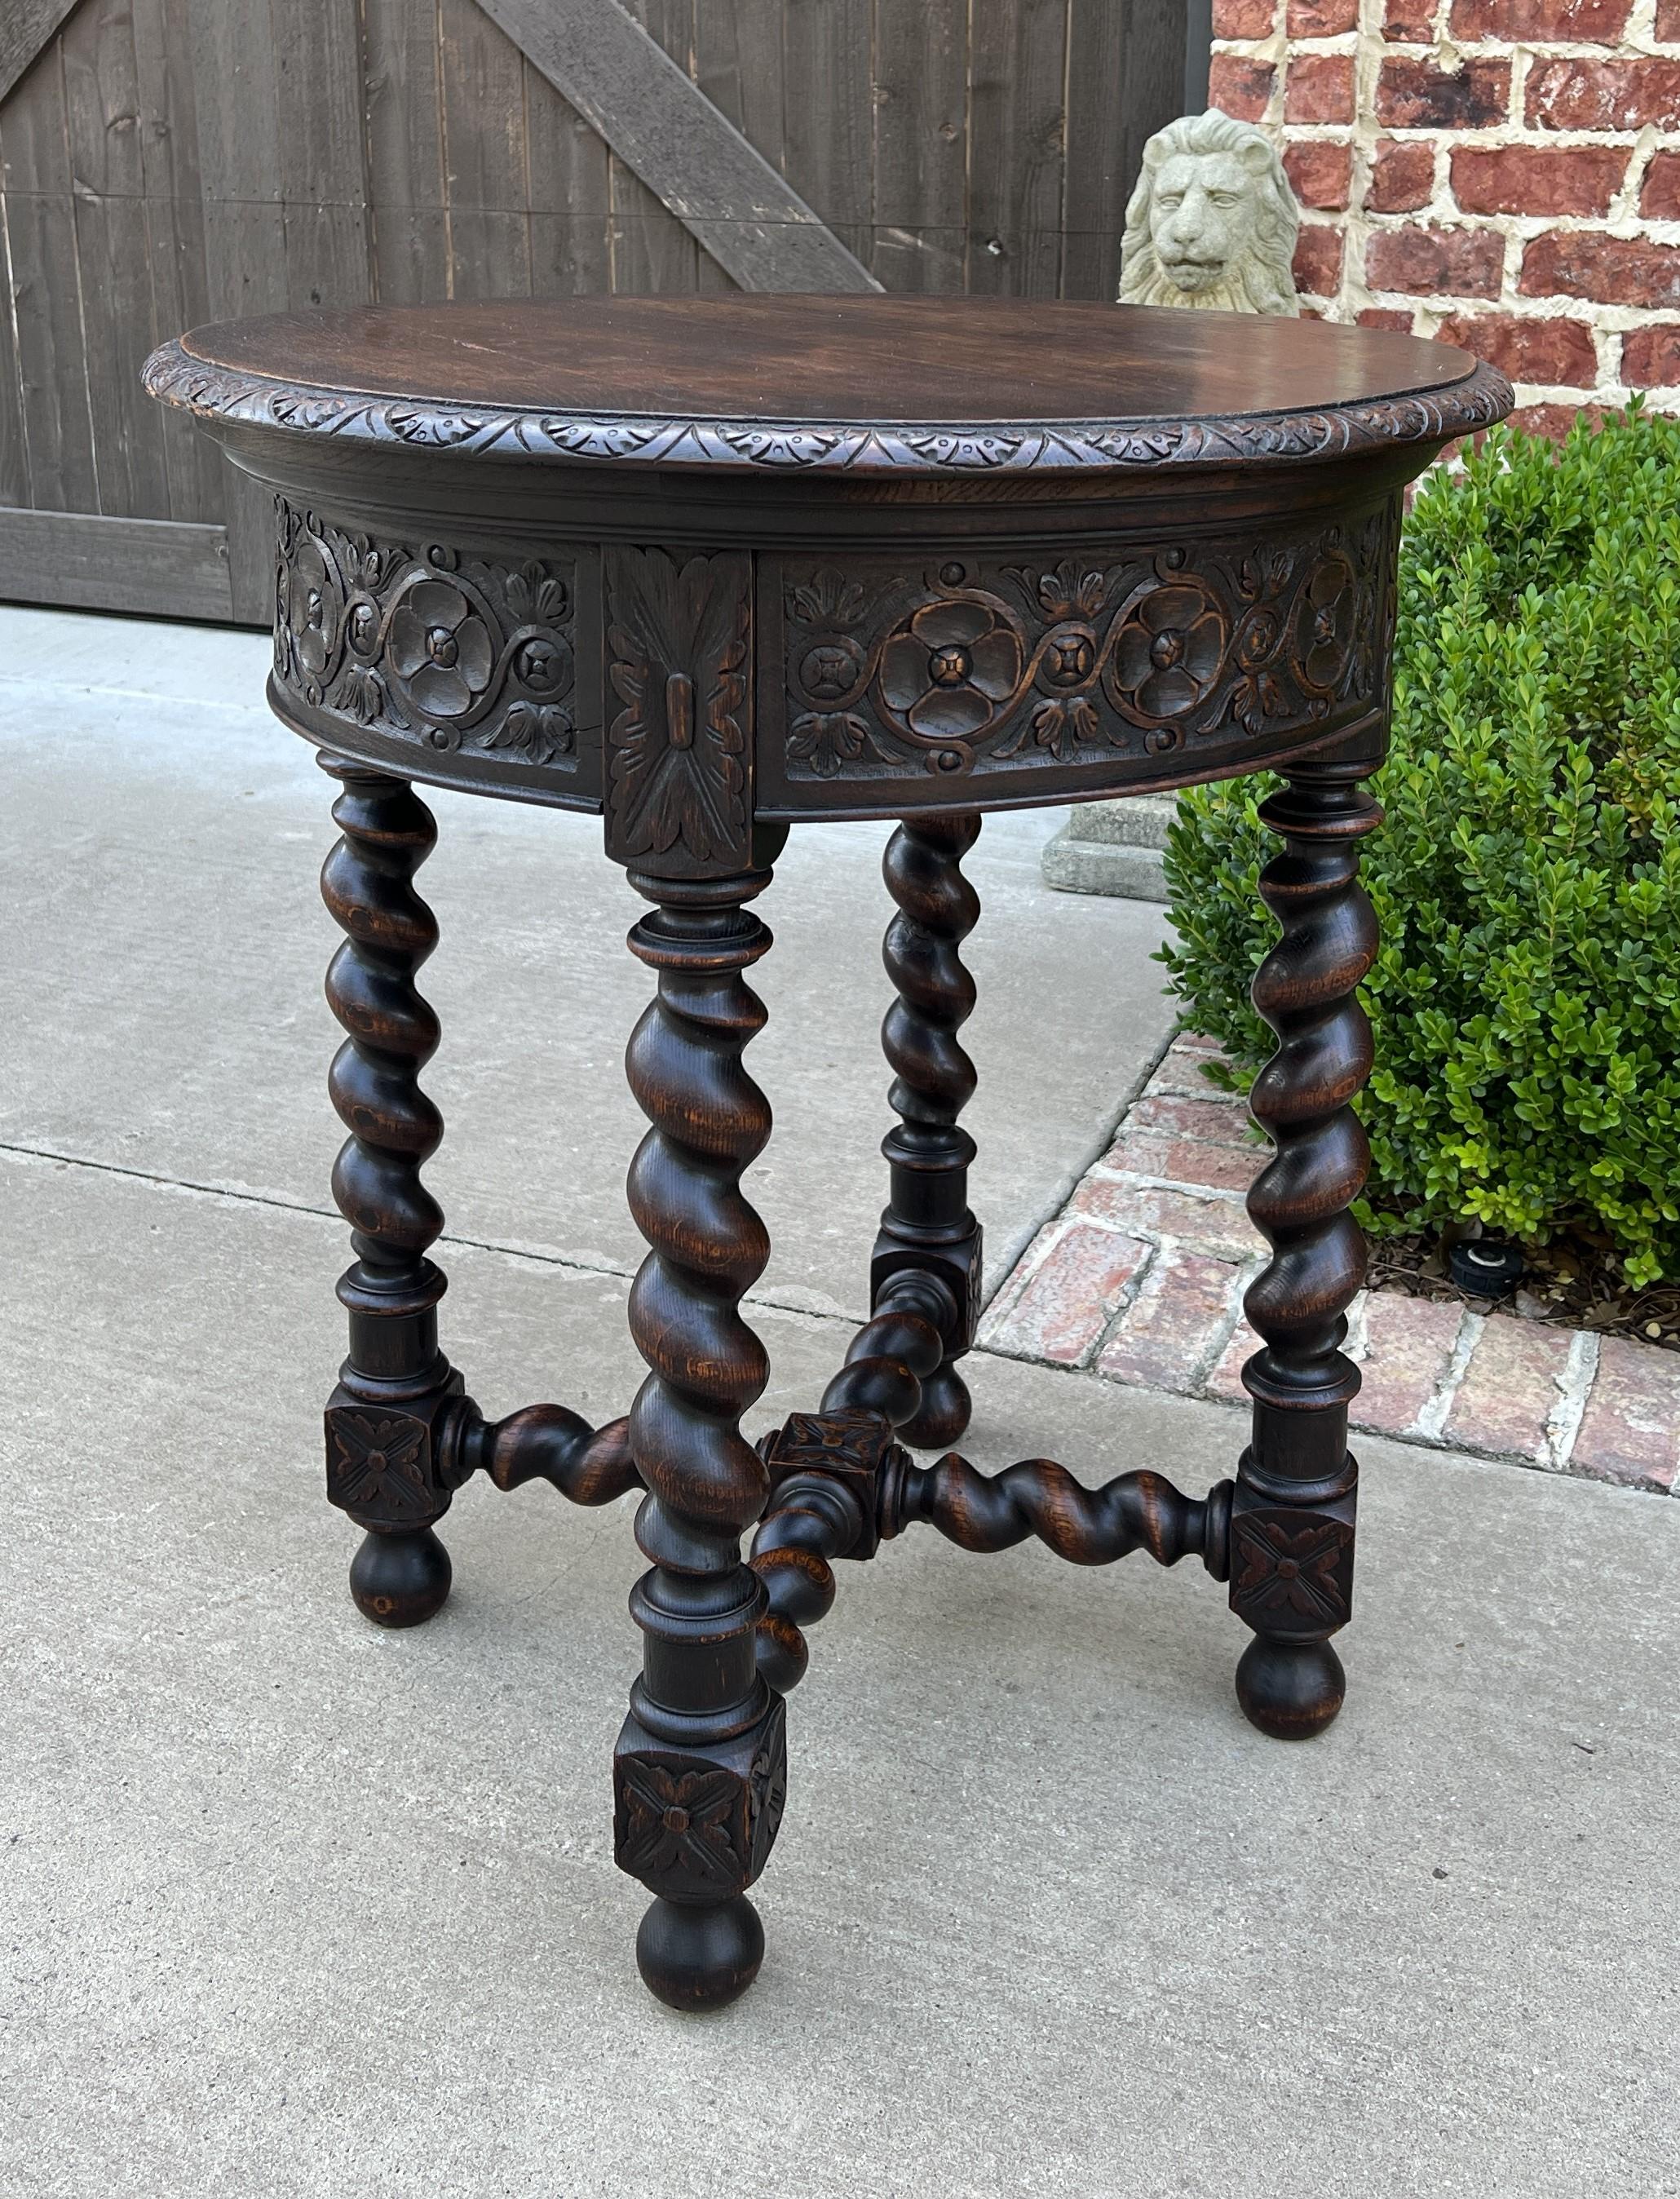 BEAUTIFUL Late 19th century Antique French Carved Oak Barley Twist ROUND Accent Table, End Table, Entry, Hall, Sofa, or Center Table with 